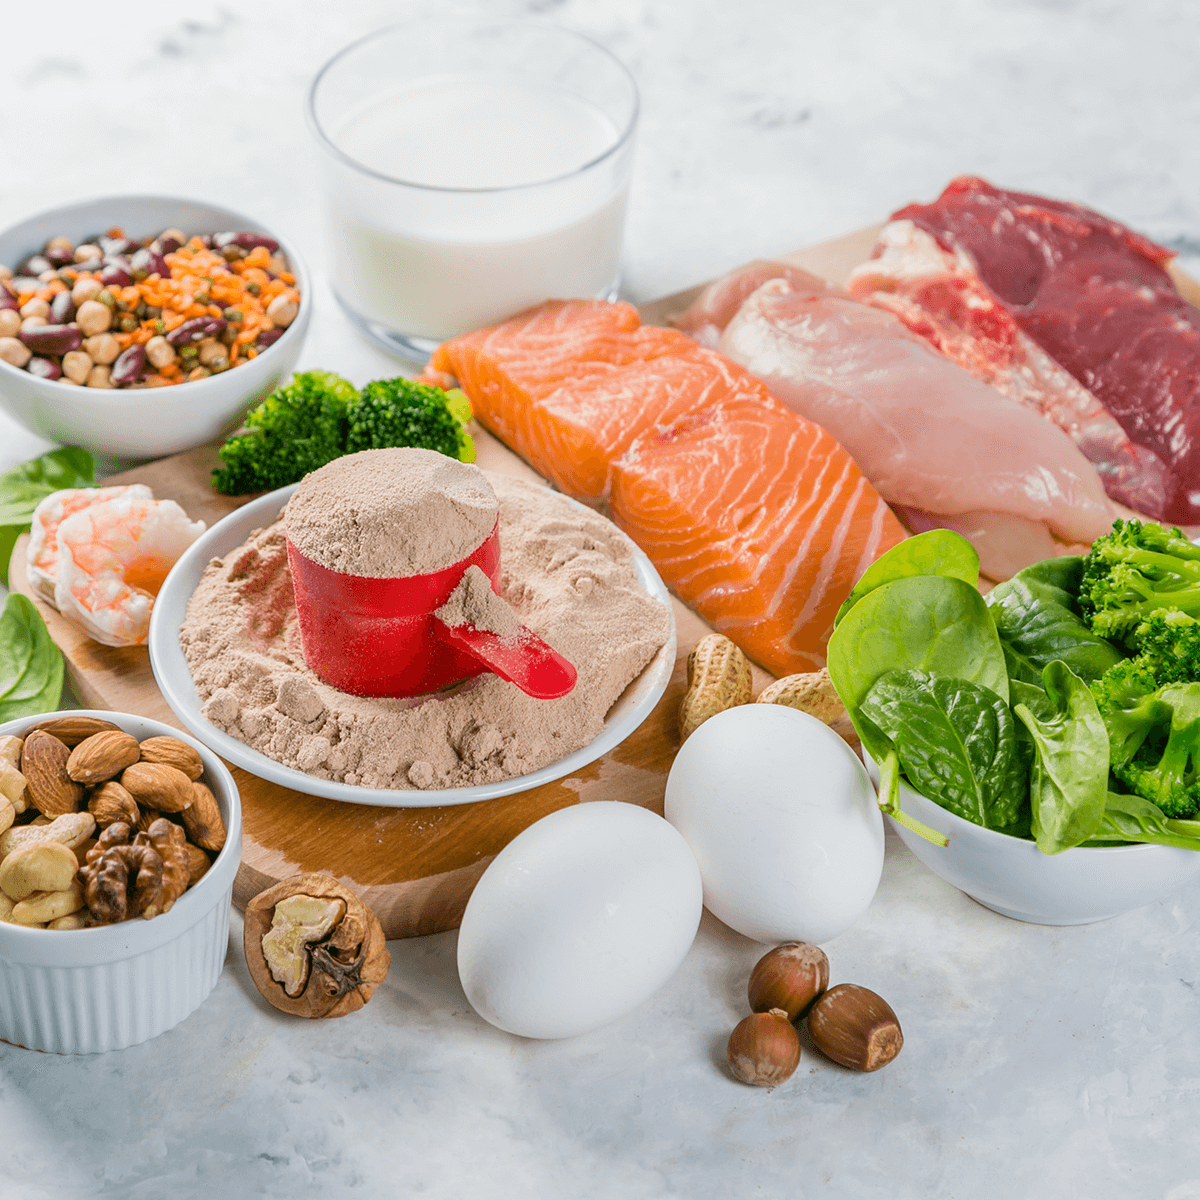 Using Protein Supplements Long-Term After Weight Loss Surgery